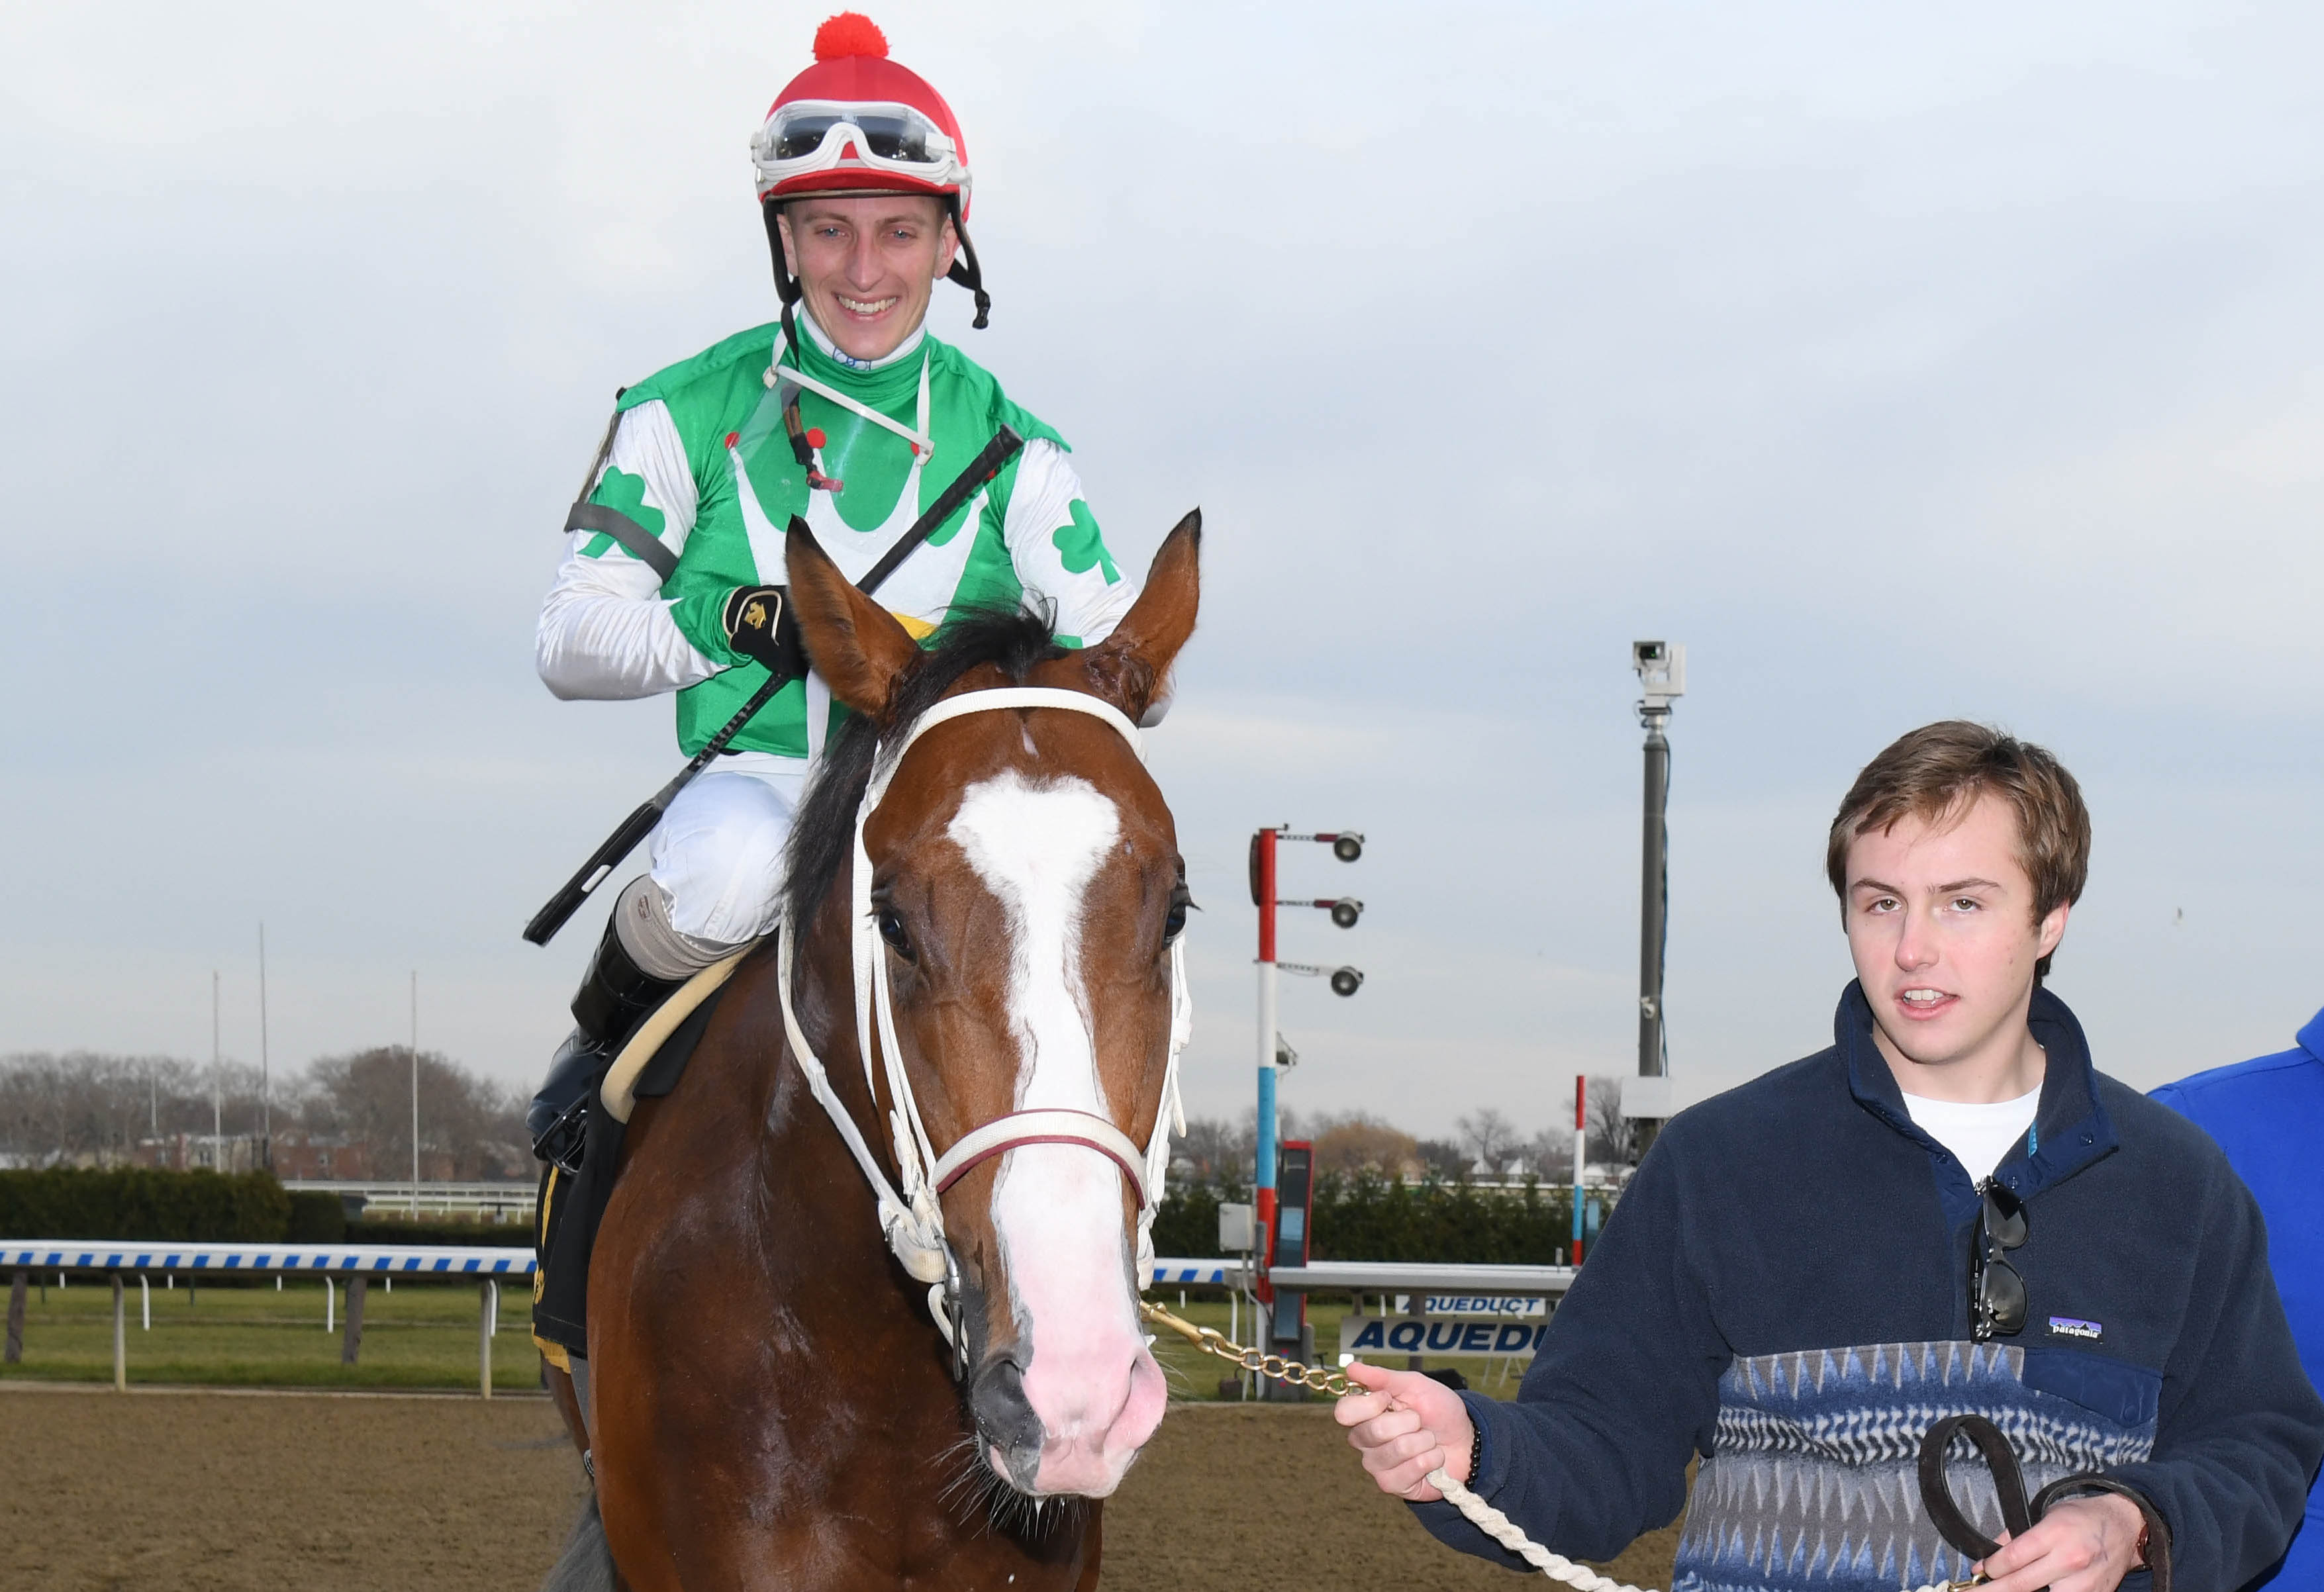 Alex Zacney leads in Maximus Mischief after his win in the Remsen Stakes at Aqueduct. Photo: NYRA.com